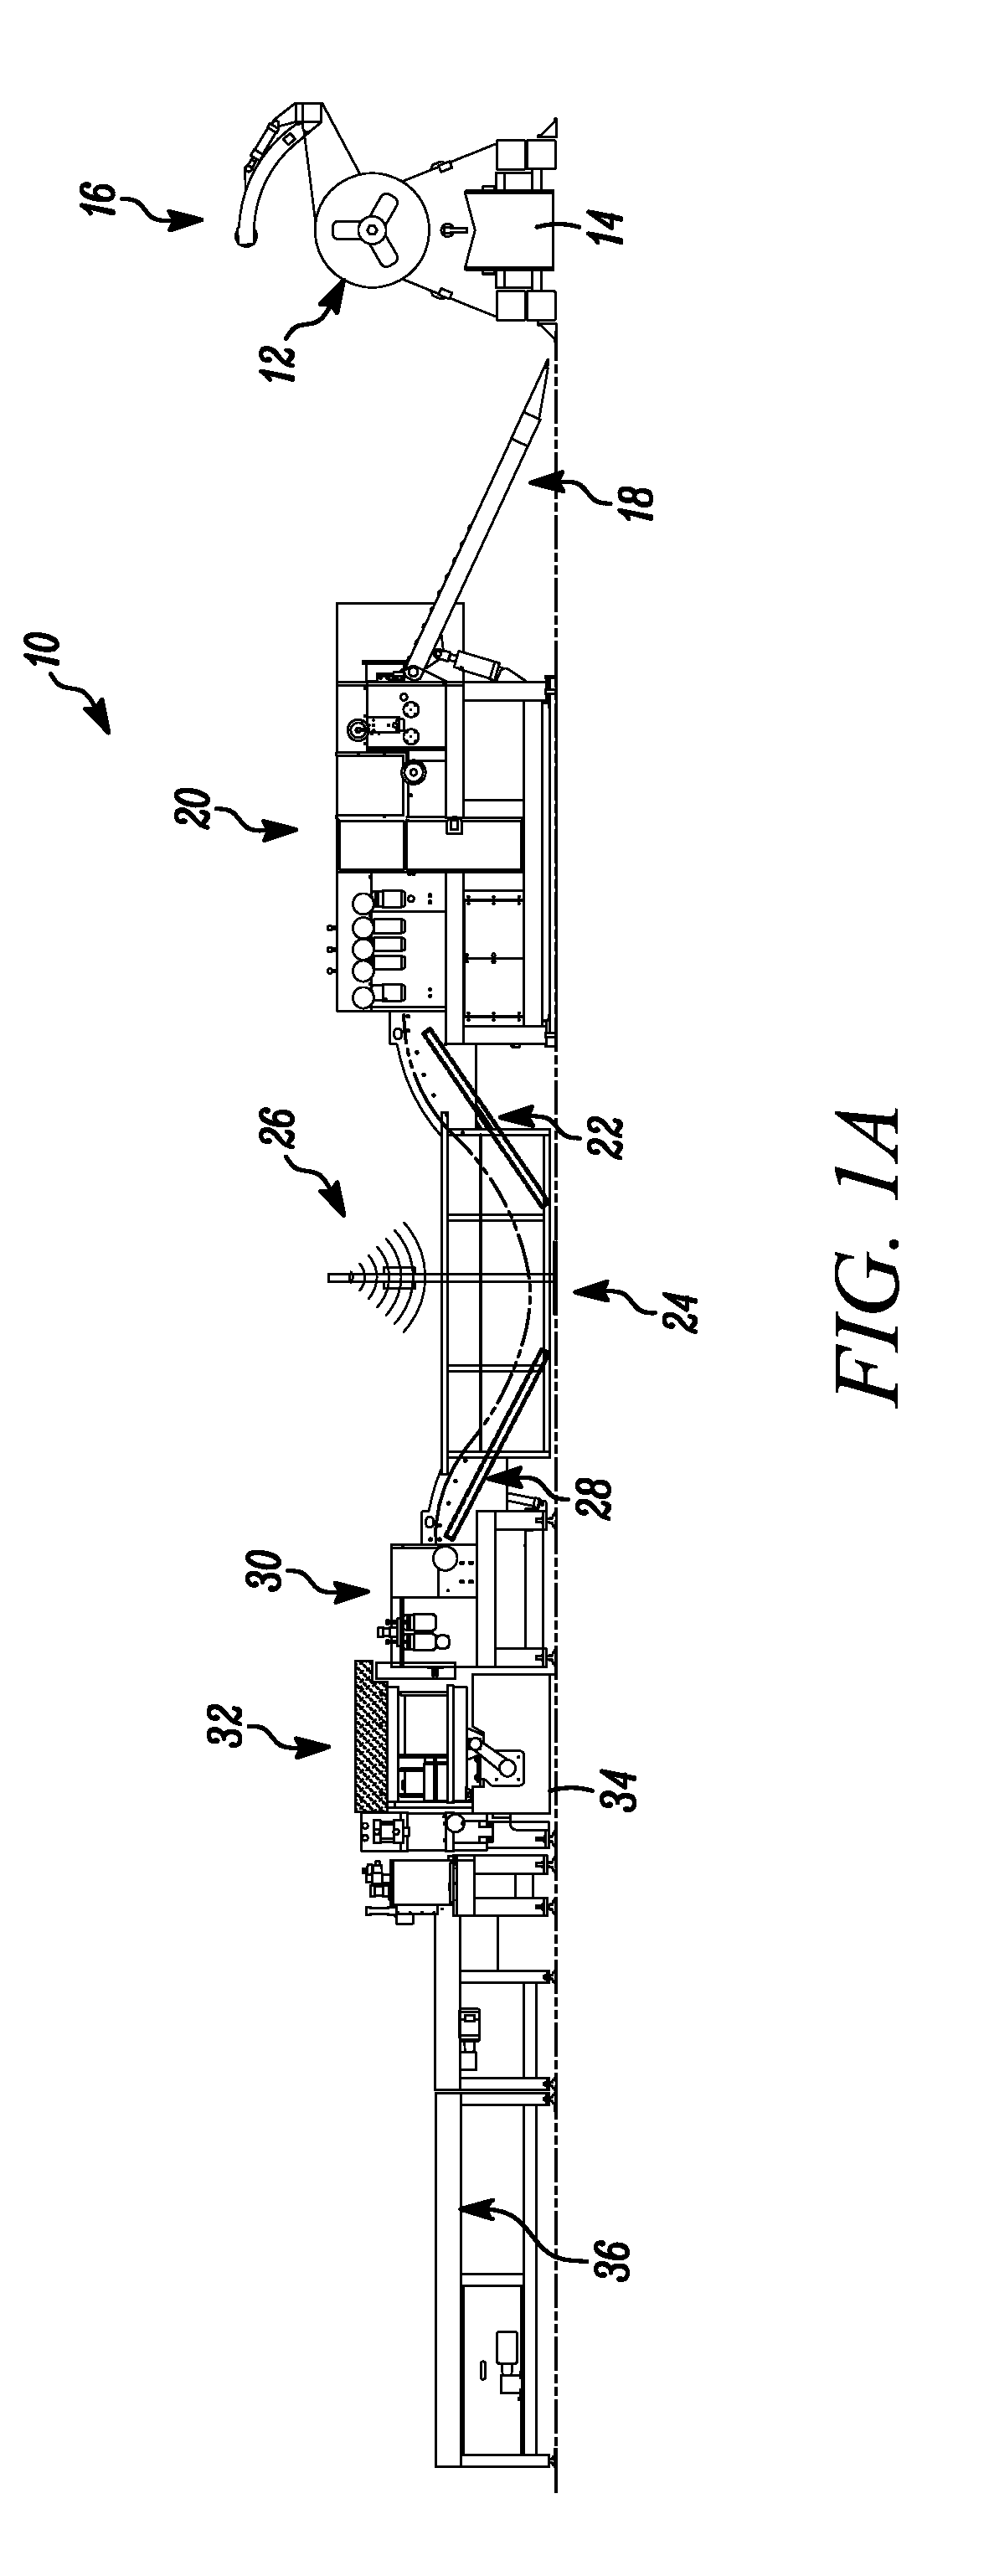 Apparatus and method for processing coiled sheet-like material